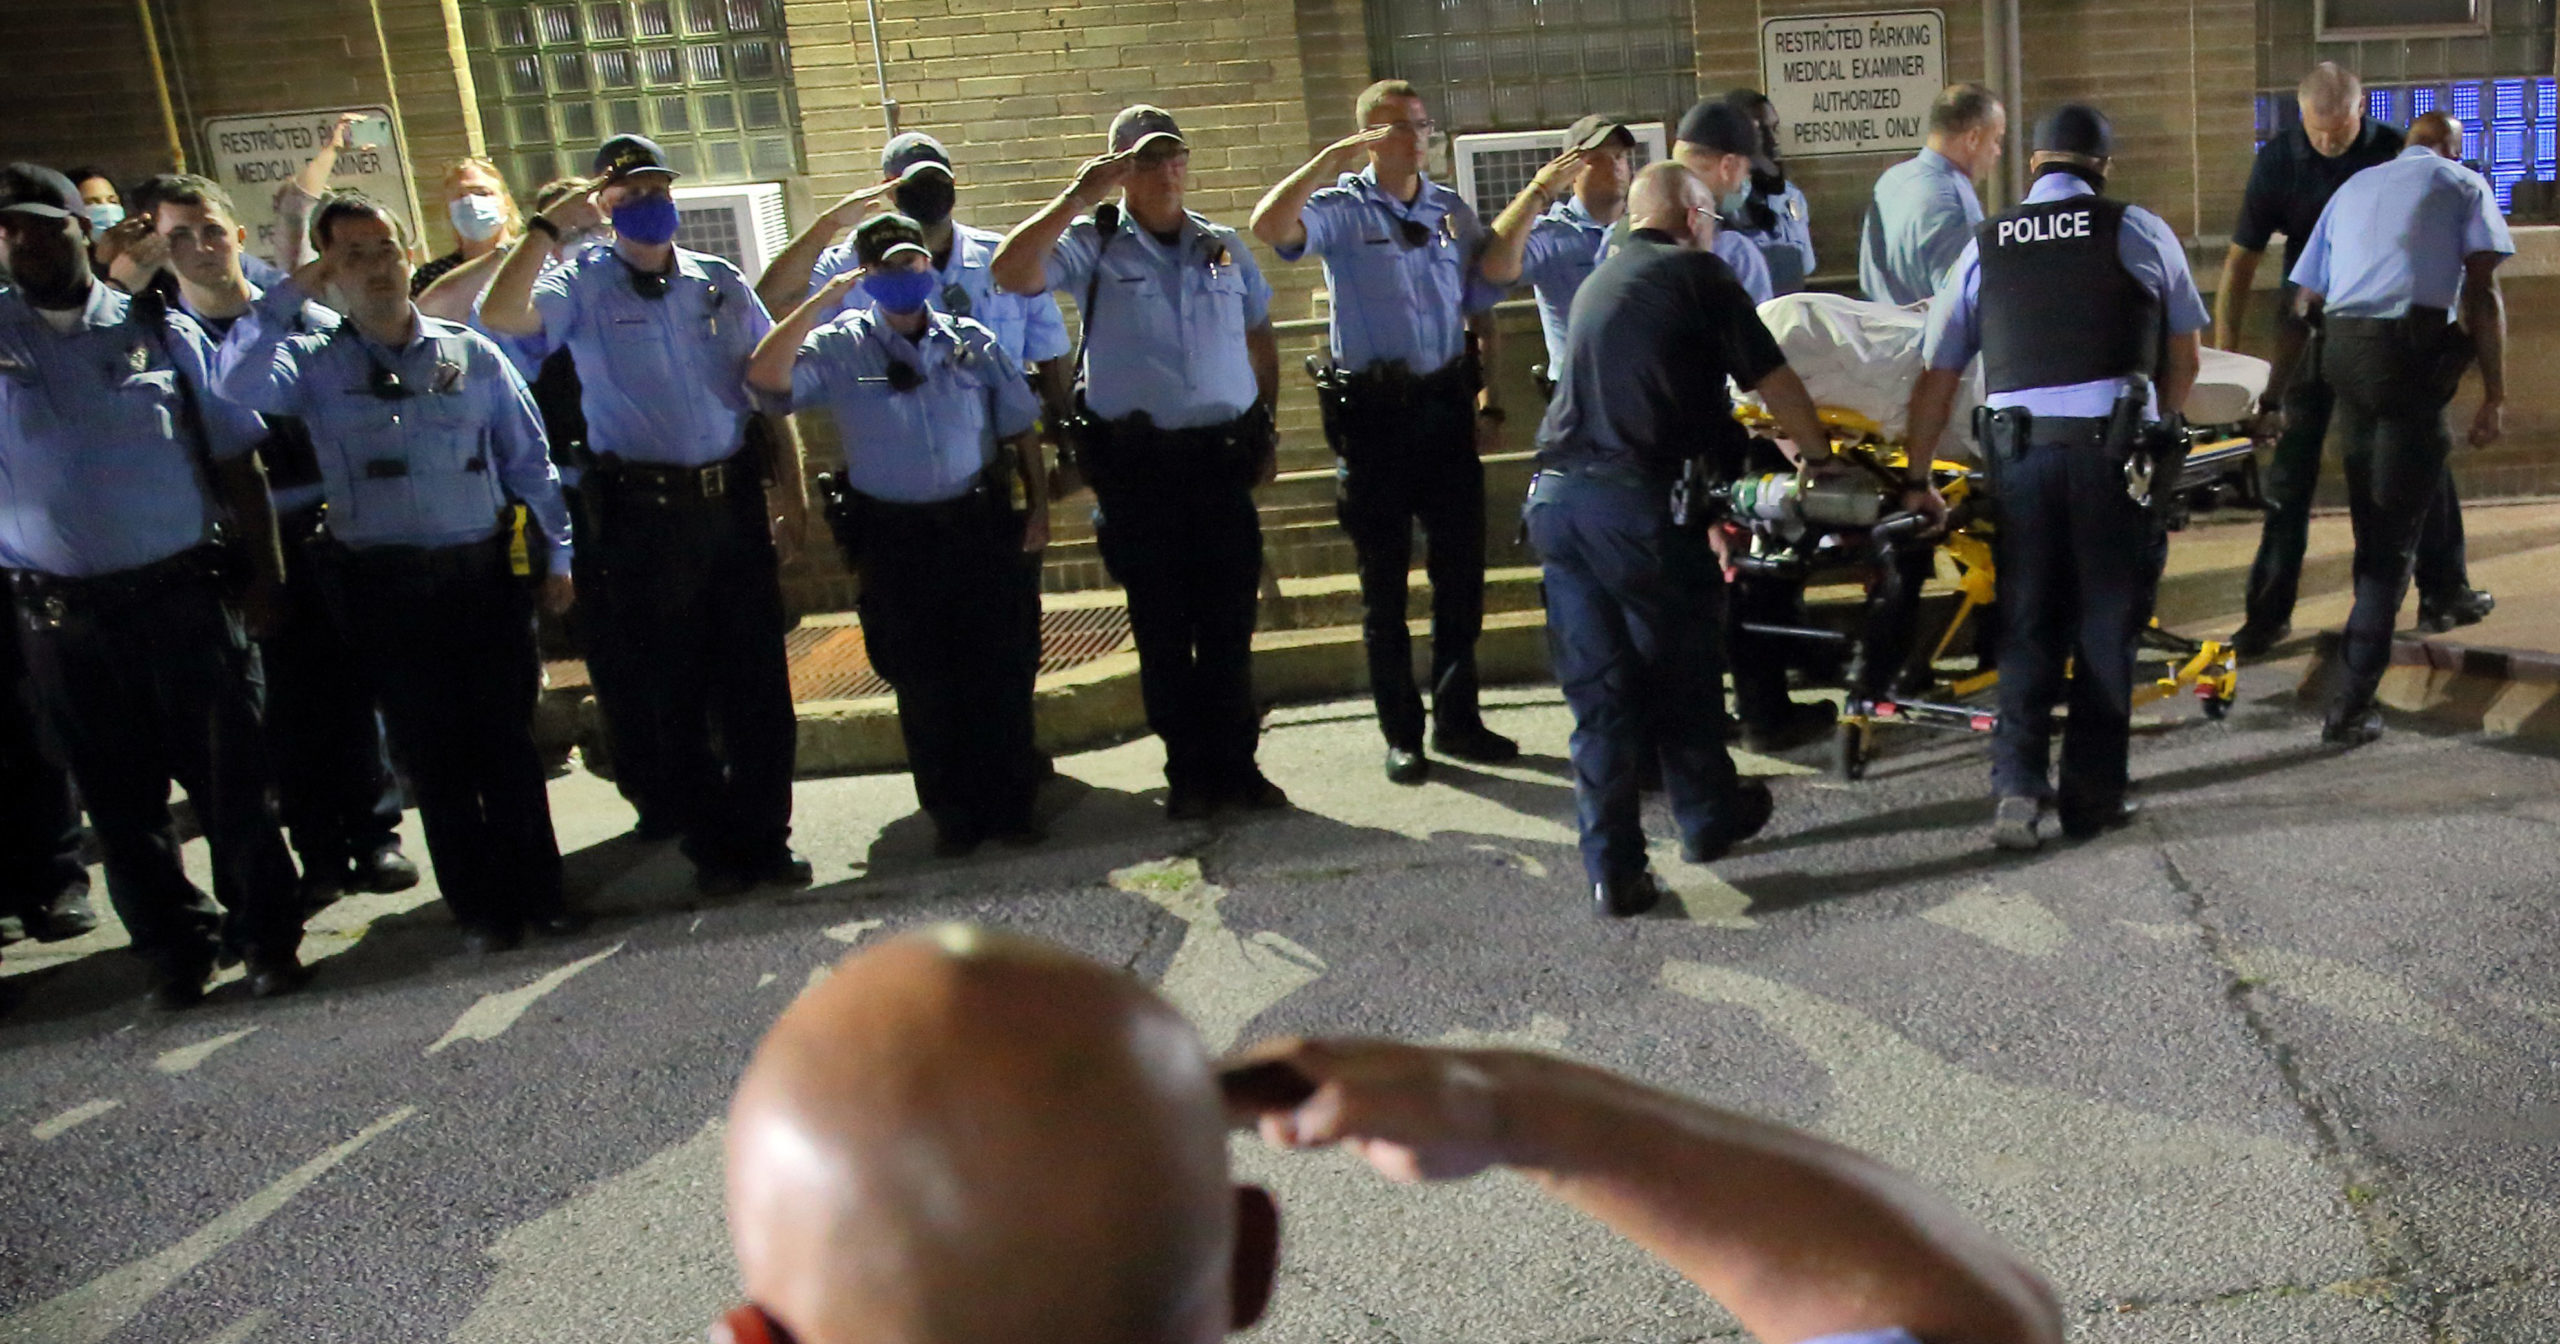 St. Louis police officers line up and salute as the body of fallen officer Tamarris L. Bohannon is brought to the morgue in St. Louis on Aug. 30, 2020. Bohannon died after being shot in the head by a barricaded gunman on the city's south side, authorities said.